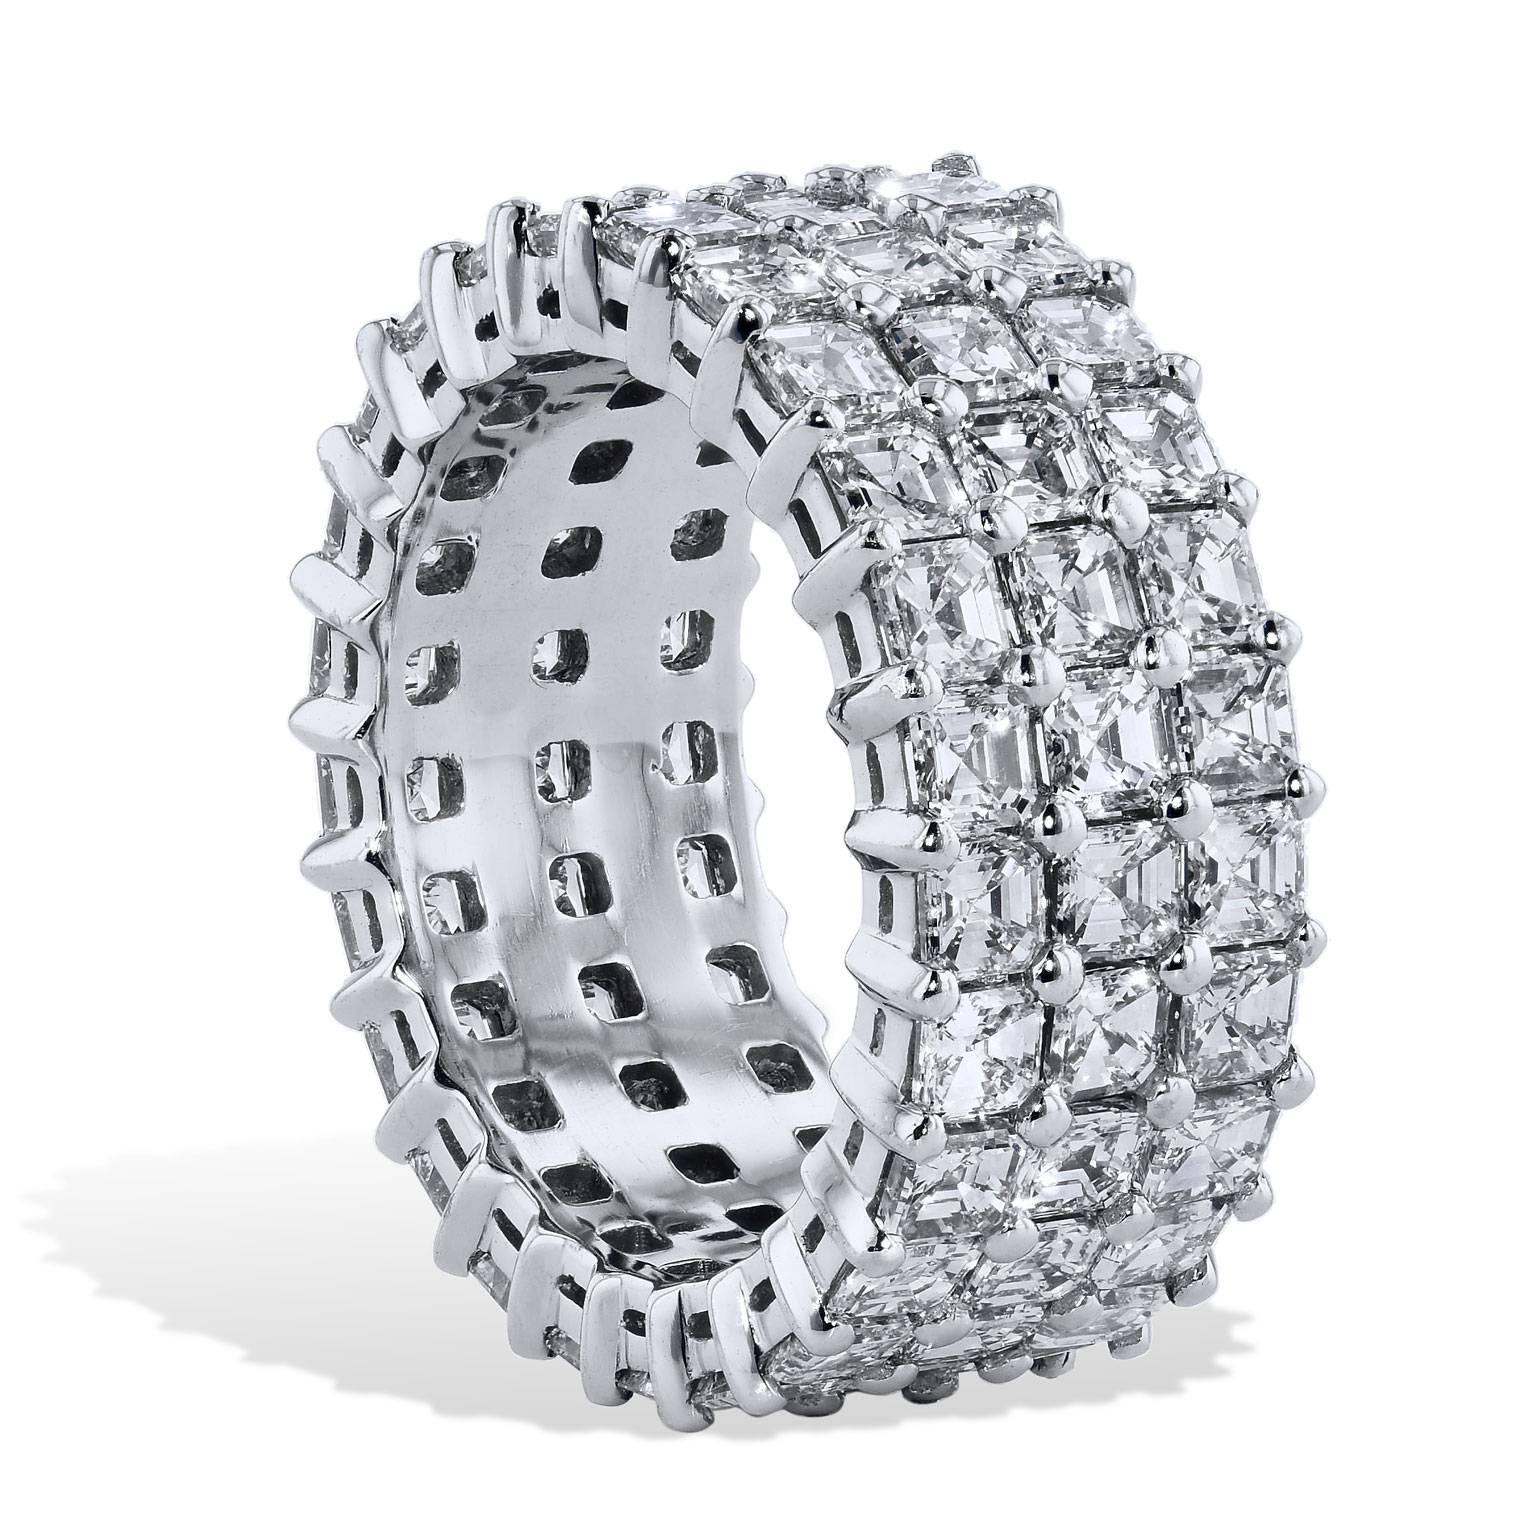 This triple row asscher cut diamond eternity band with double basket fashioned in platinum with shared prong will stir and illuminate the essence of her beauty. A symbol of never-ending love, this 6.43 carat (G/H/VS) eternity band will set her heart